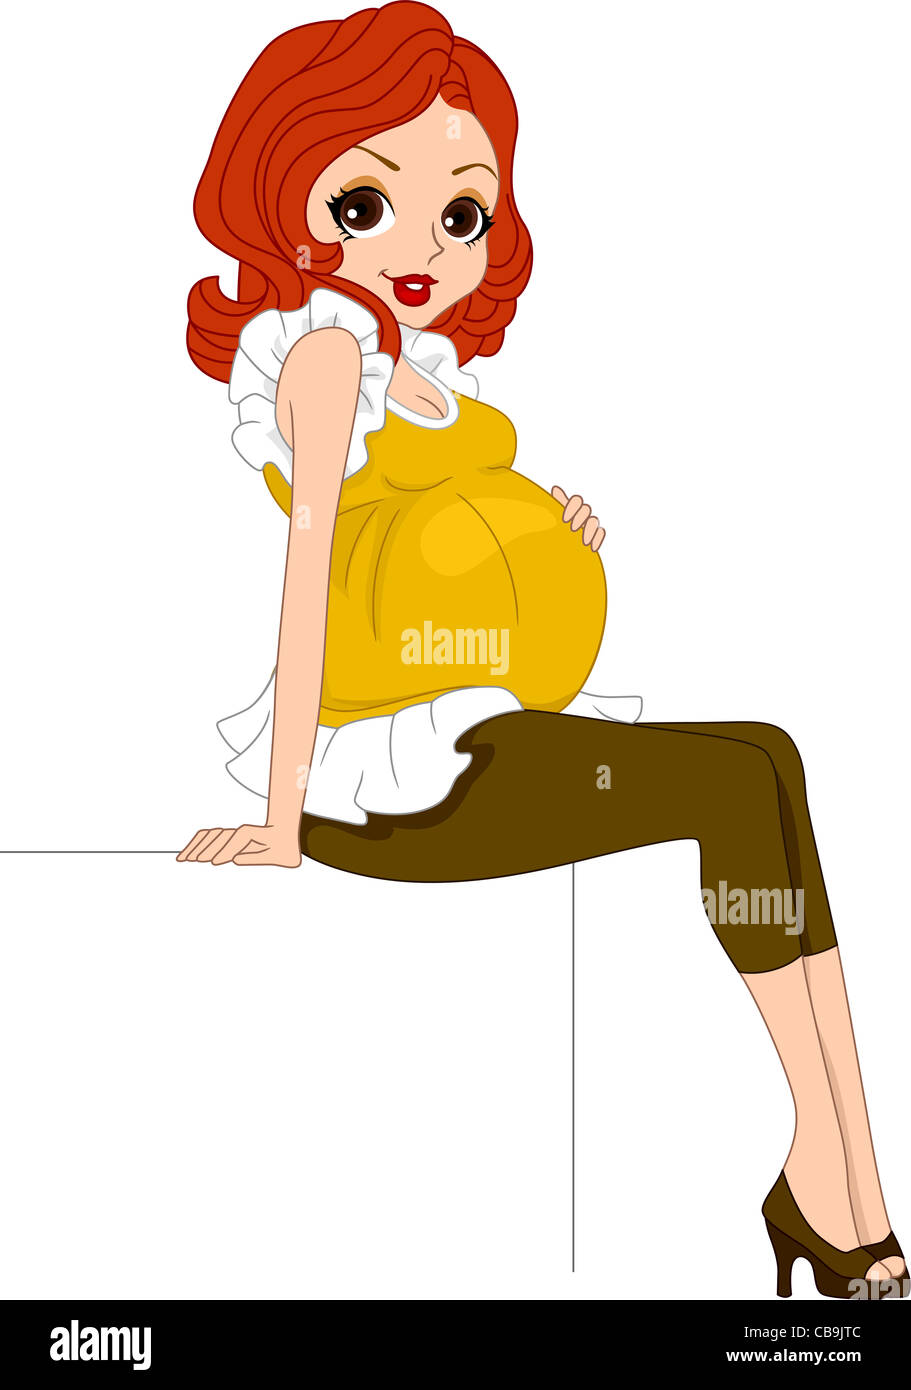 Illustration of a Pregnant Pinup Girl Stock Photo